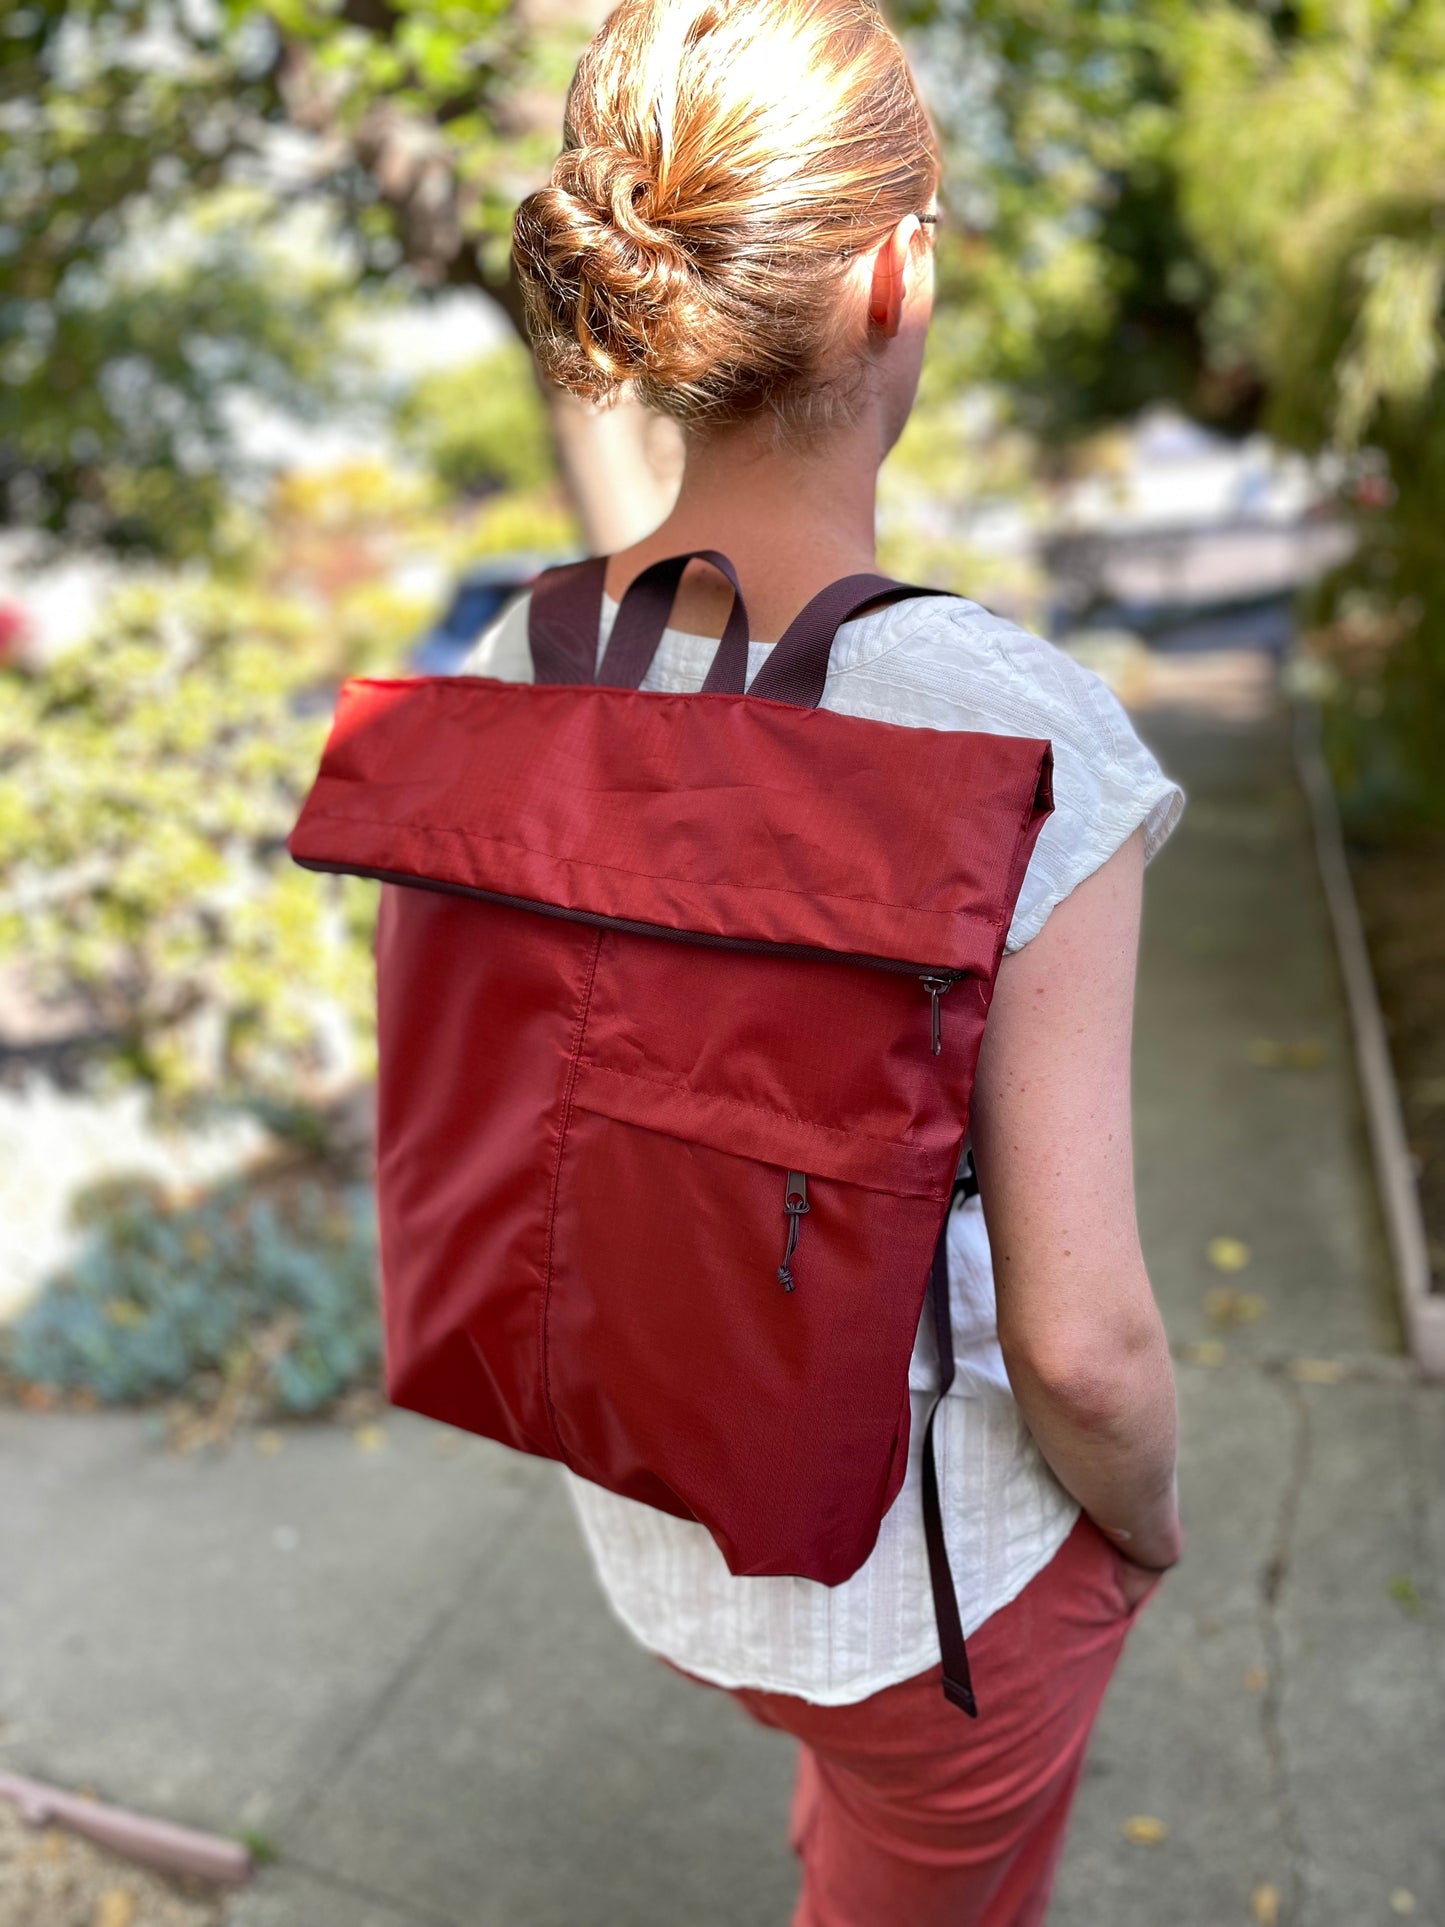 foldable backpack for travel - flip & tumble - best packable backpack for travel, this packable foldable rucksack style is great for travel